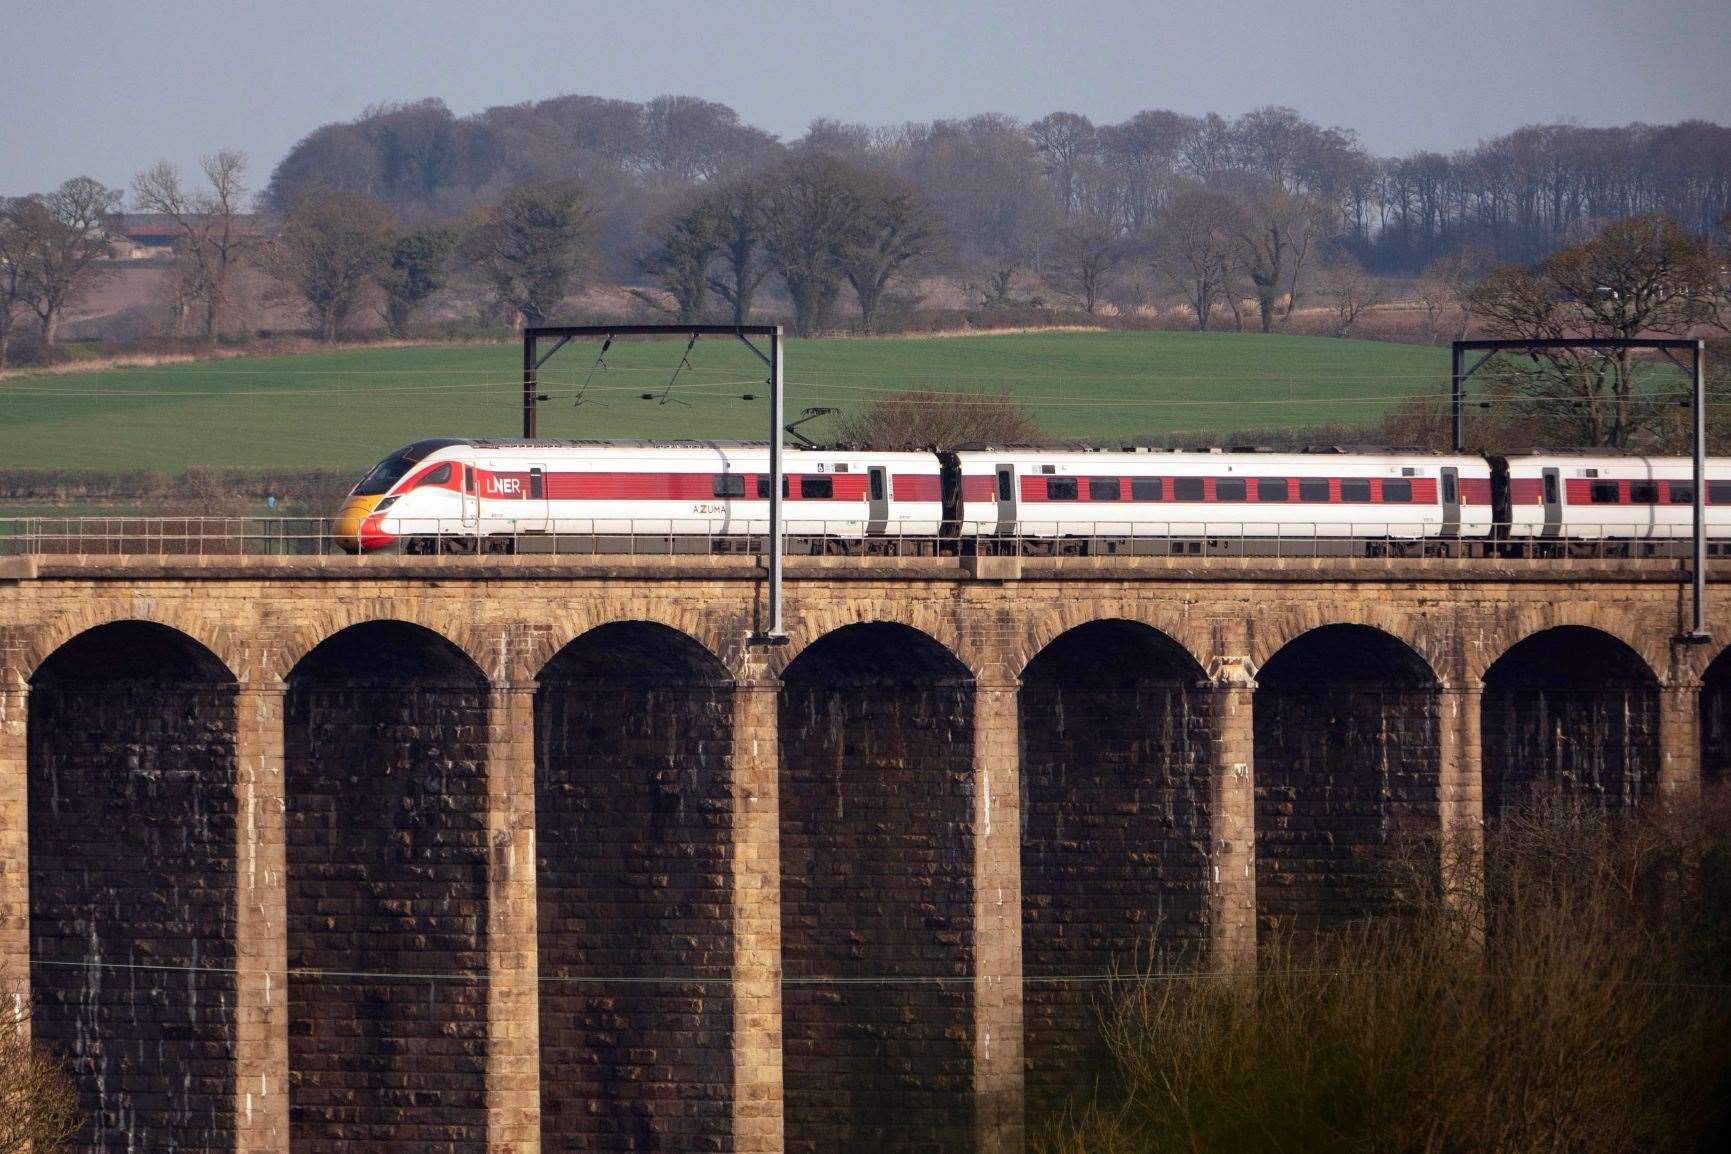 LNER has resumed services to Inverness following the completion of safety checks on trains.